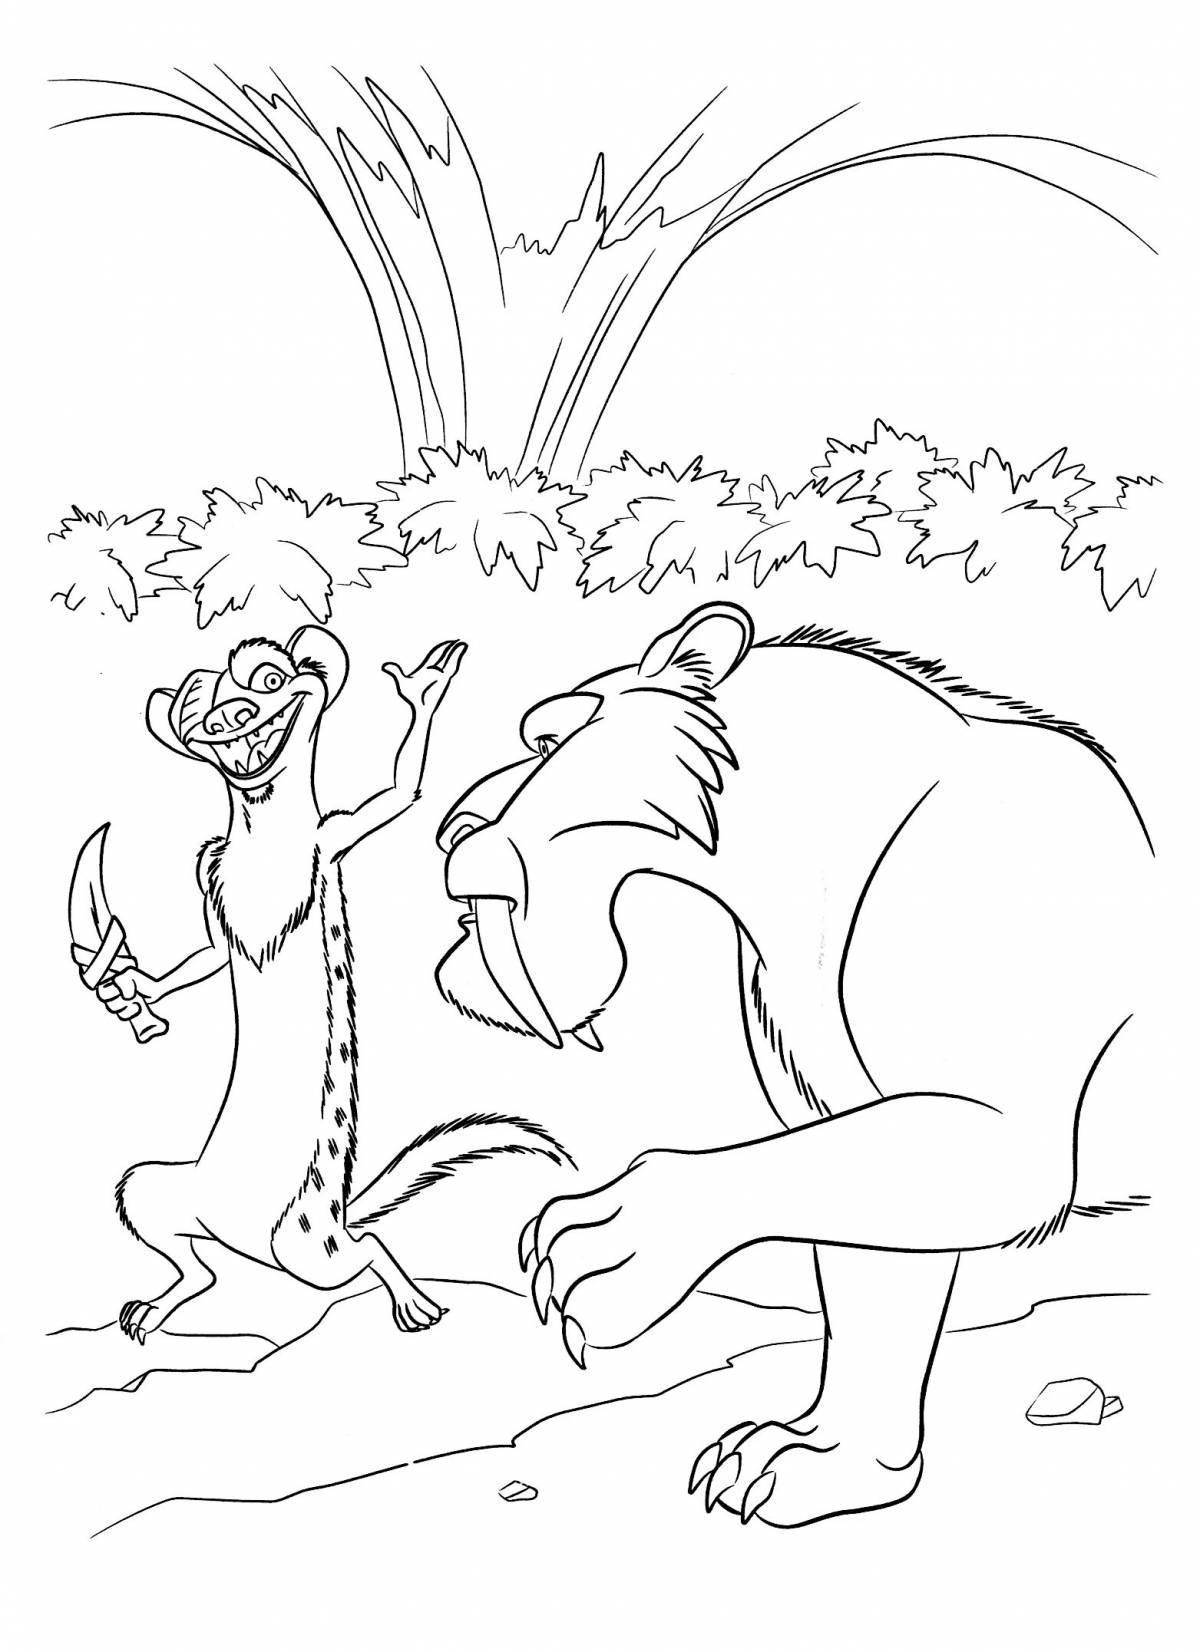 Splendid ice age 3 coloring page